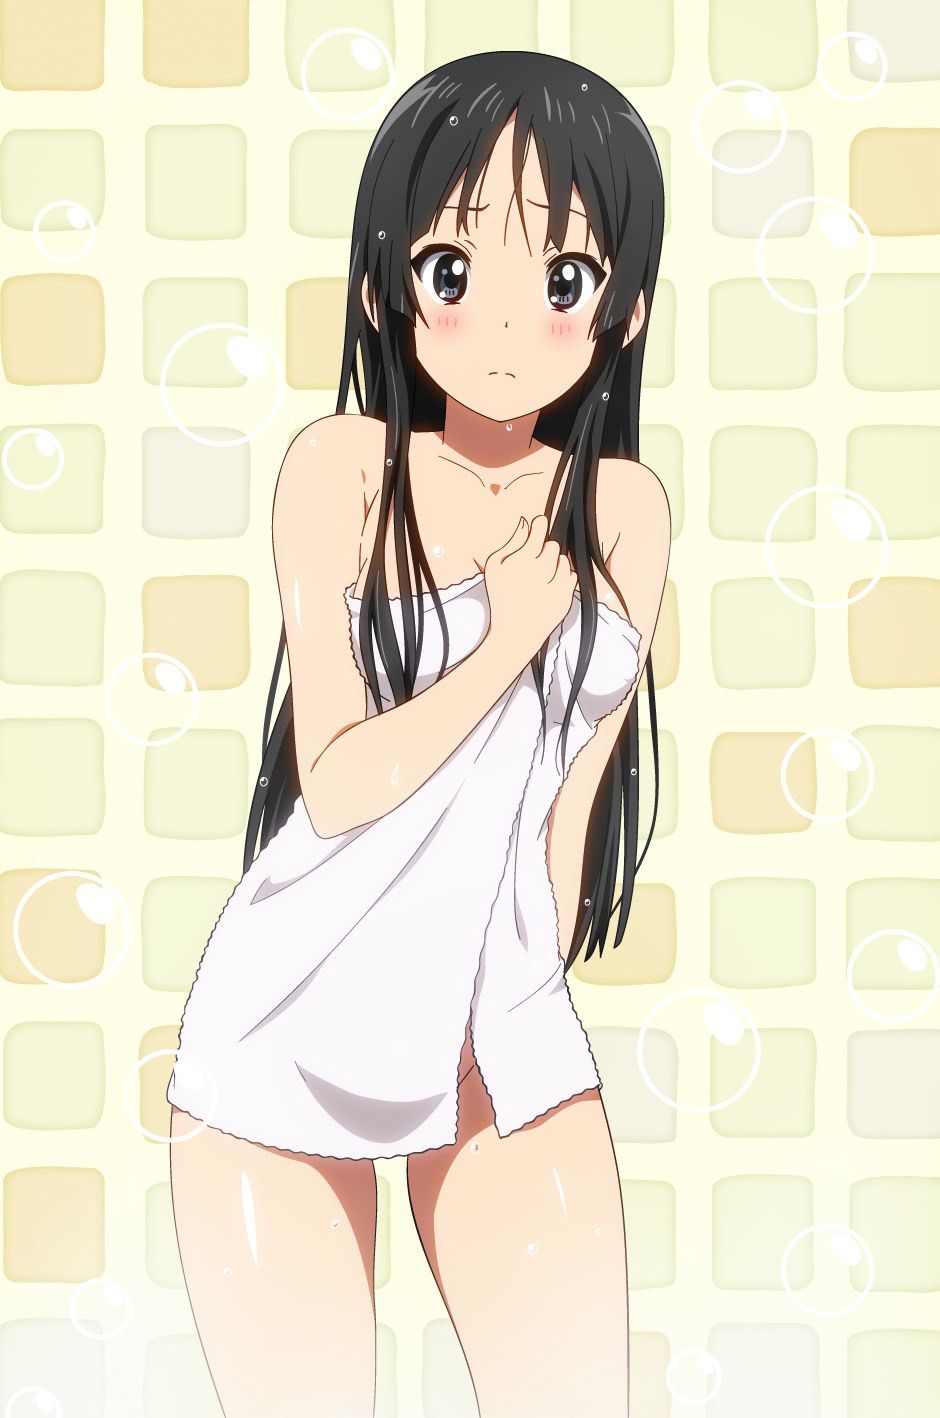 [2nd] Now I want to Hin nude towel appearance of beautiful girl secondary erotic image part 11 [Naked towel] 3